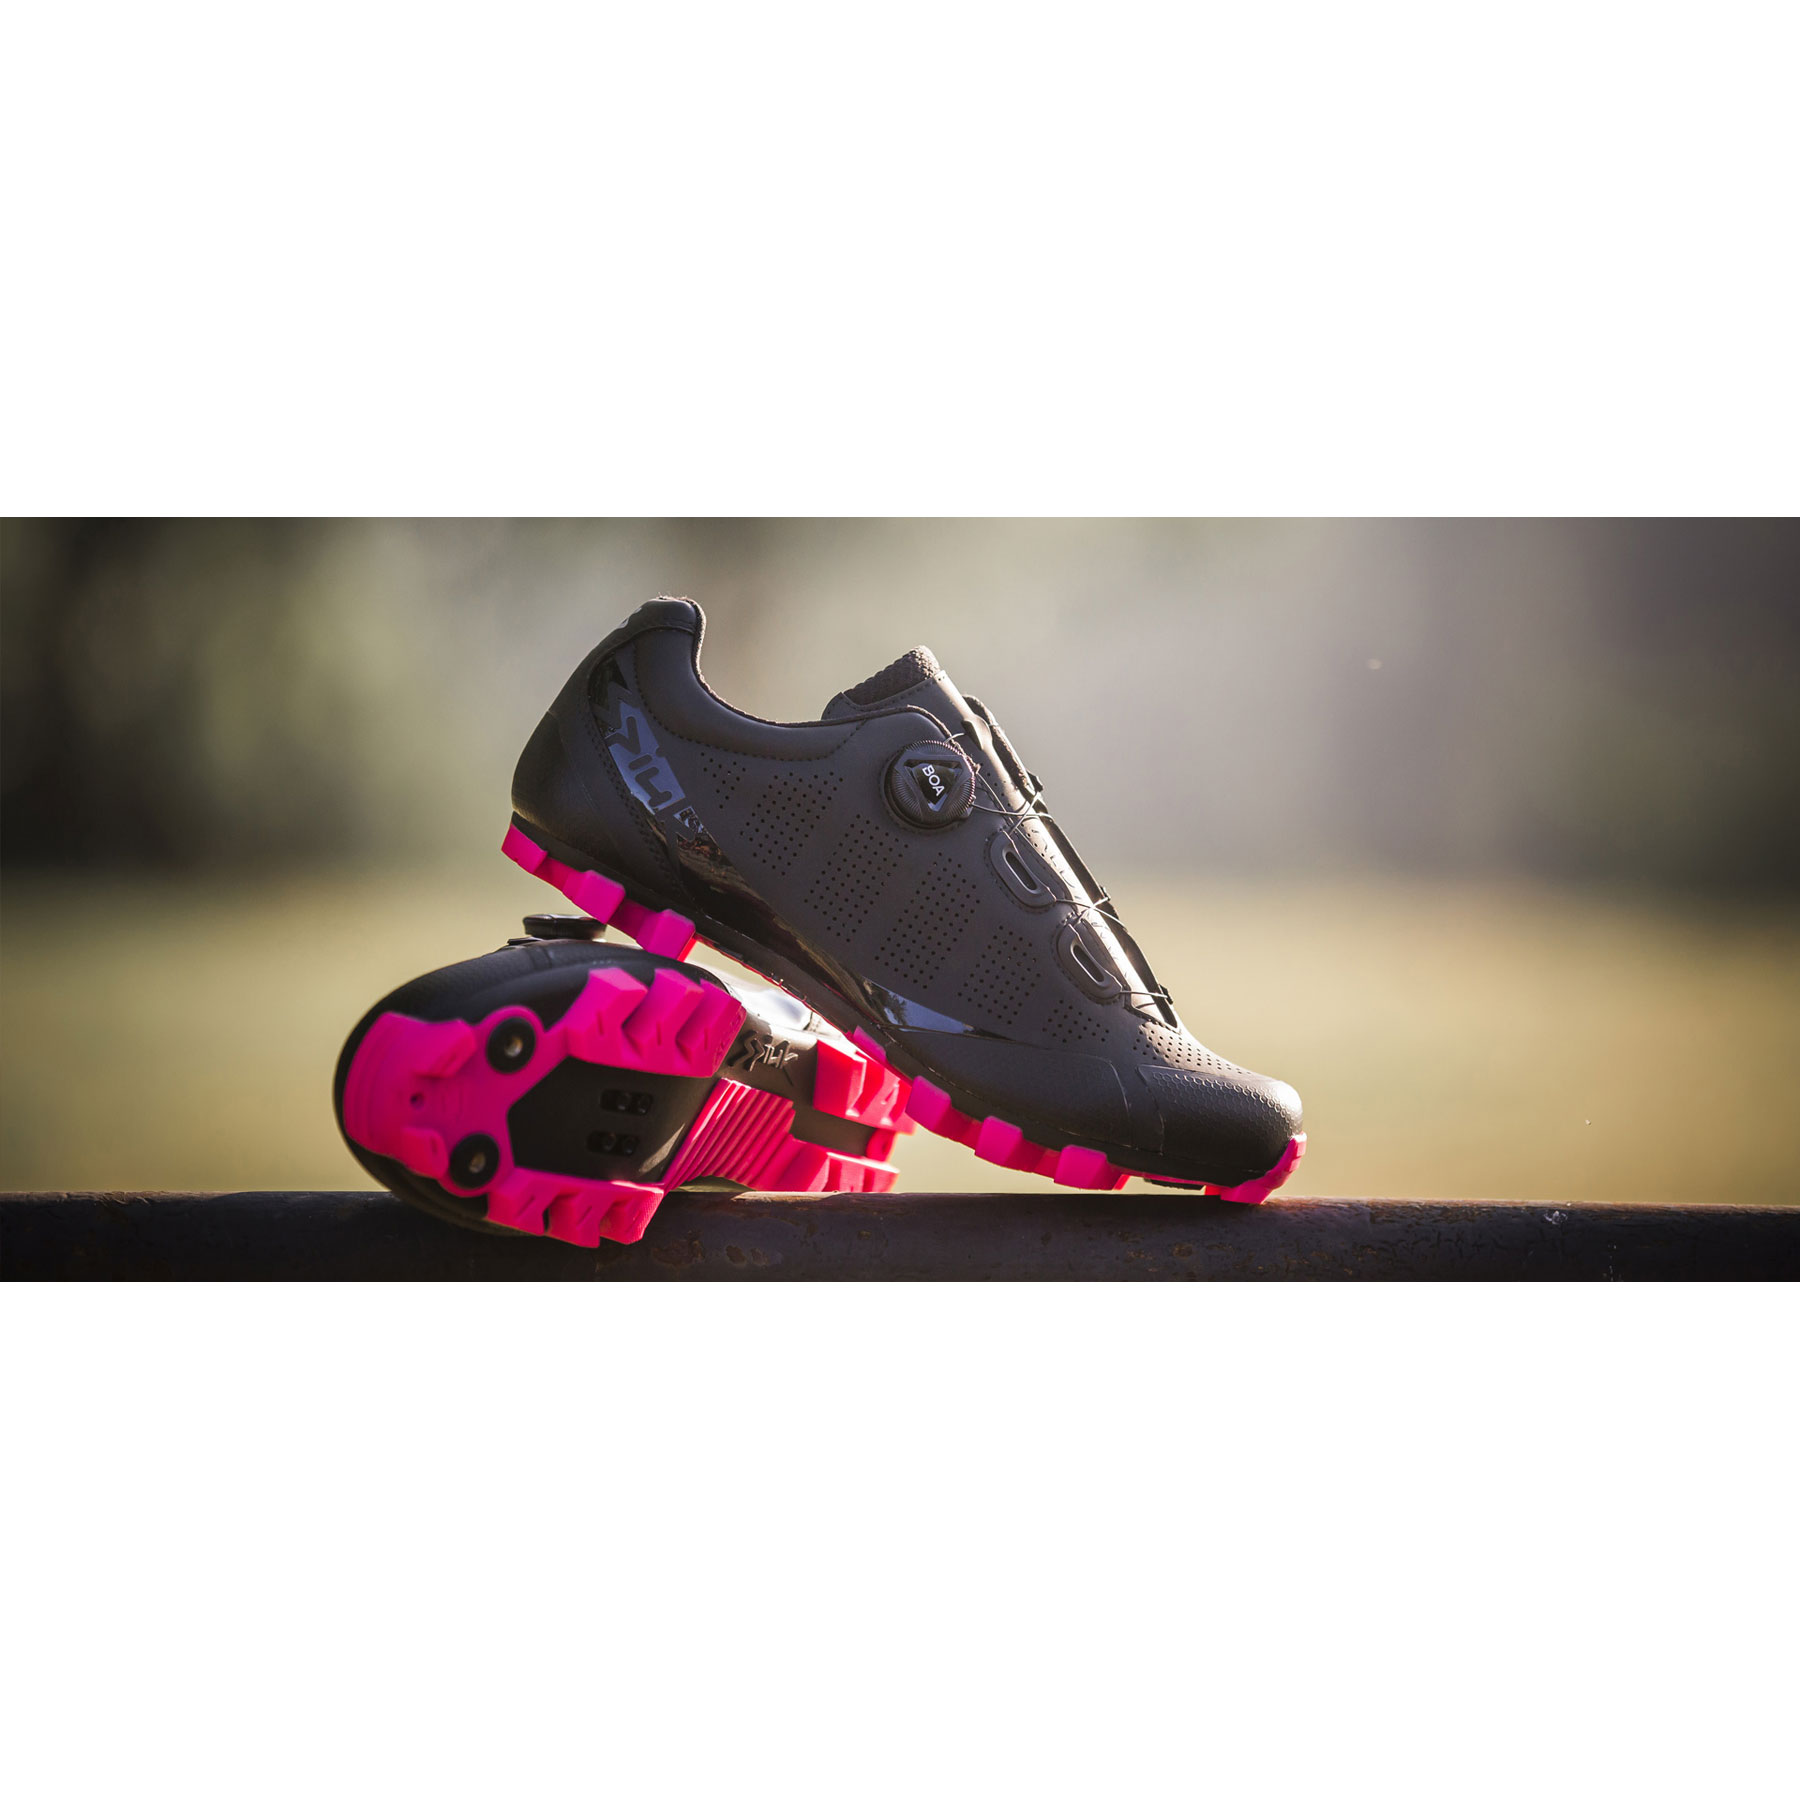  Spiuk Sportline ALDAPA MTB Shoes, Adults, Unisex, Matte Red, T.  44 : Clothing, Shoes & Jewelry